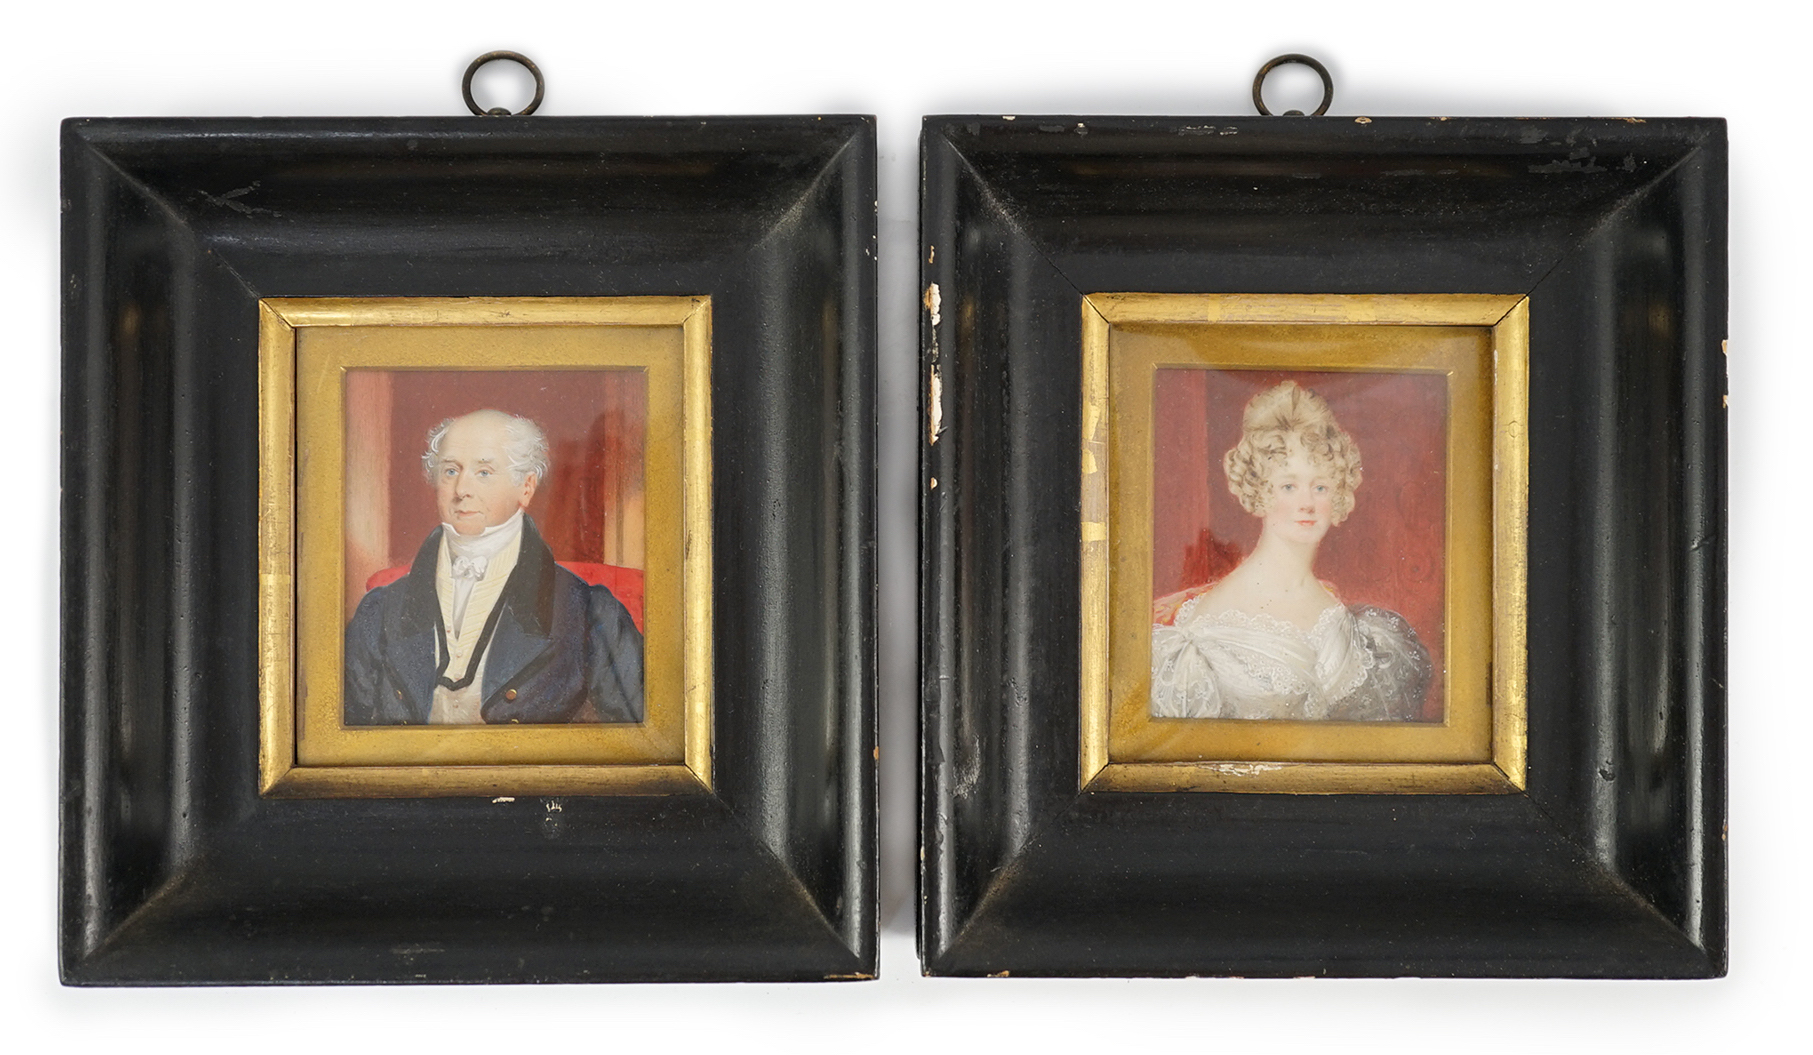 Harriette Graham (19th C.), Miniature portraits of Miss Baker & Mr Baker, Jan'y 1836, watercolour on ivory (a pair), 7.5 x 6.5cm. CITES Submission reference XRAZ1MT6